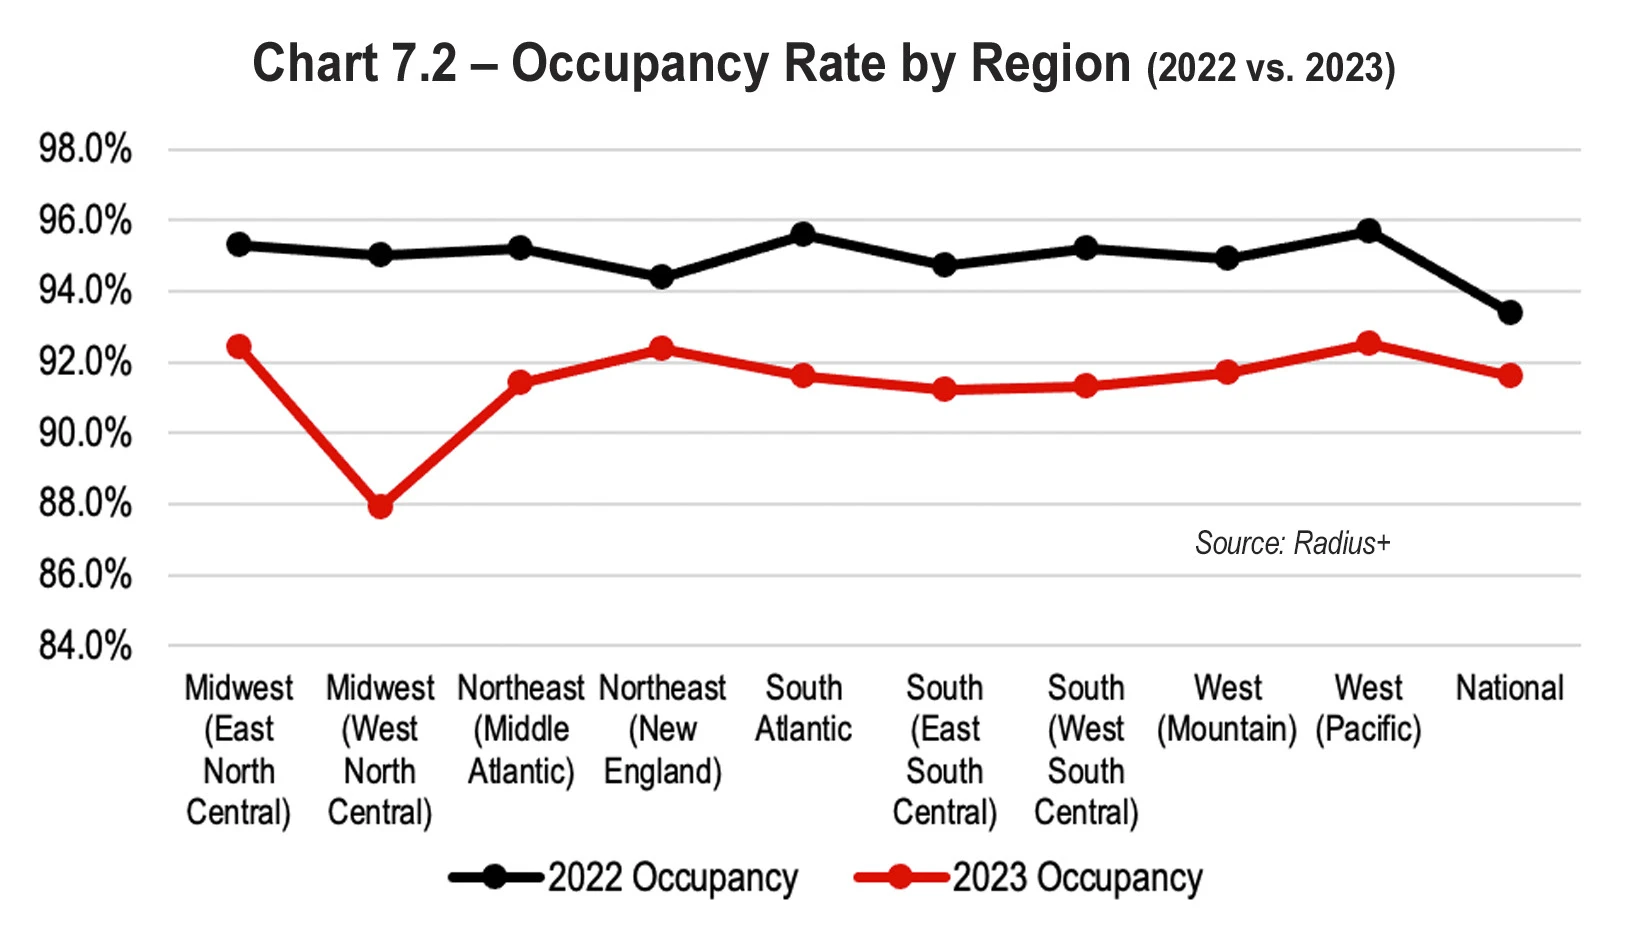 Chart 7.2 - Occupancy Rate by Region (2022 vs. 2023)